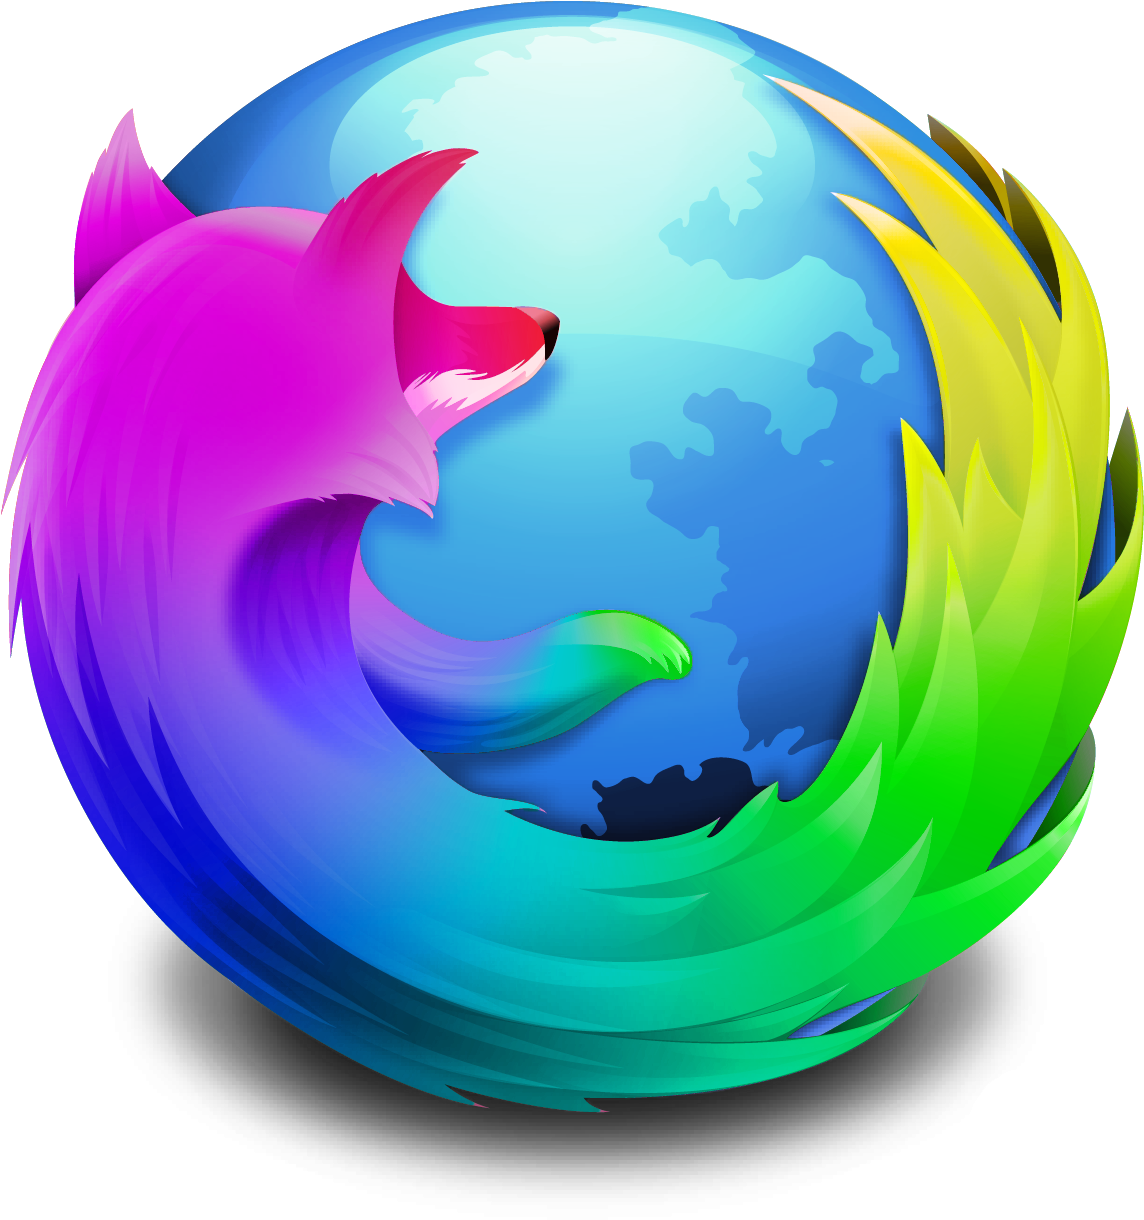 Just Made An Rd Firefox Icon, Wat U Guise Think - Iconvert Icons (1233x1233)